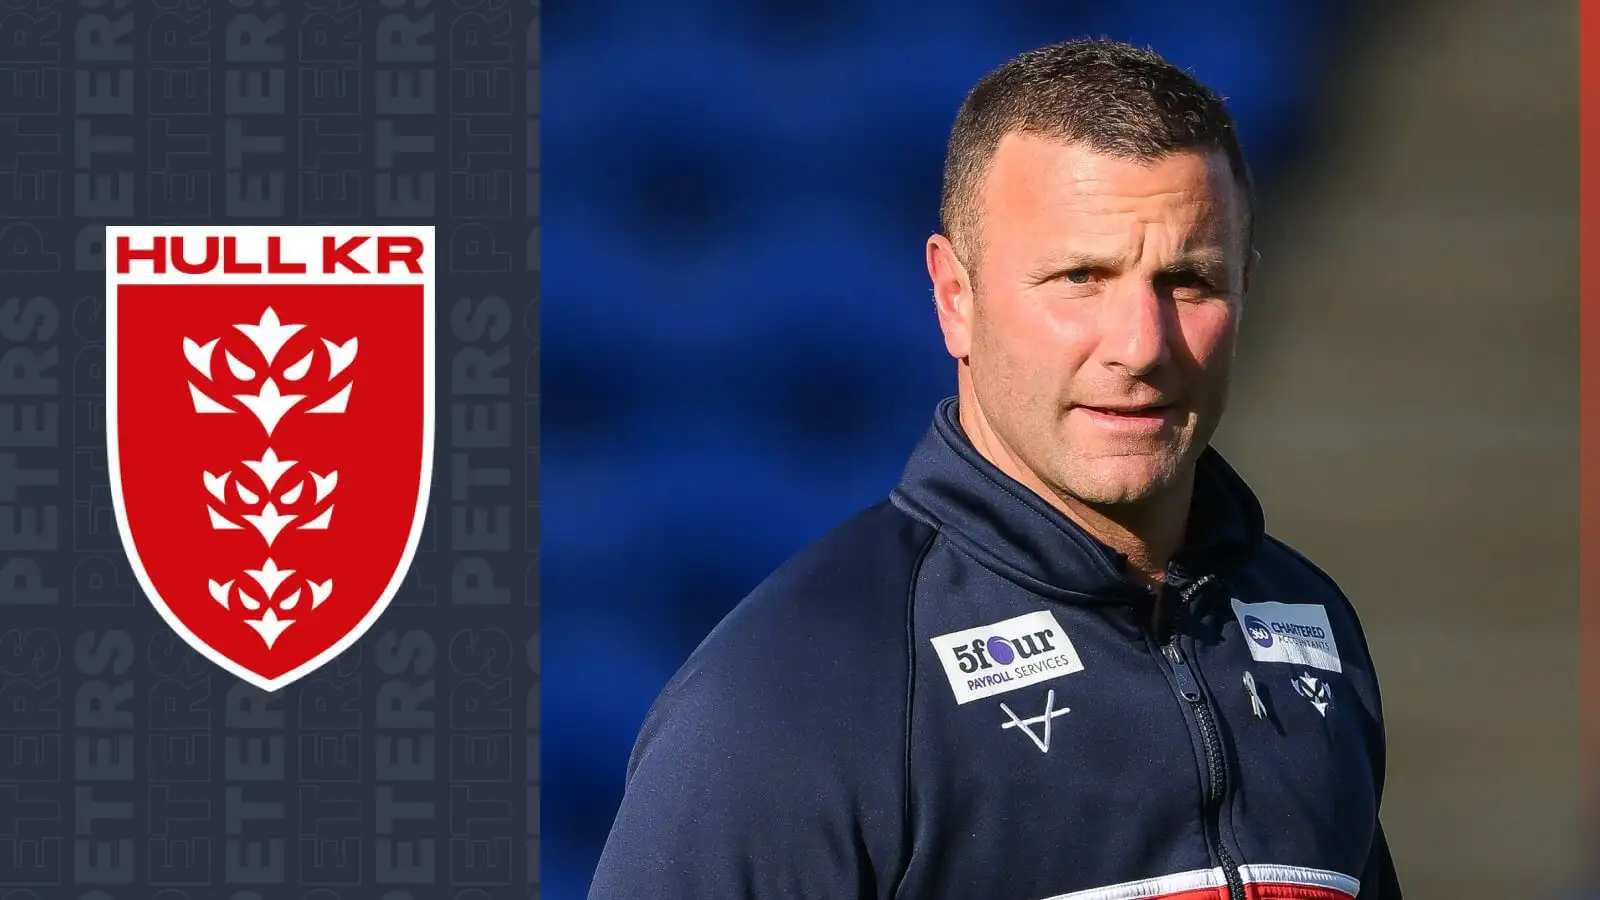 Hull KR coach Willie Peters confirm forward duo ahead of schedule in injury returns